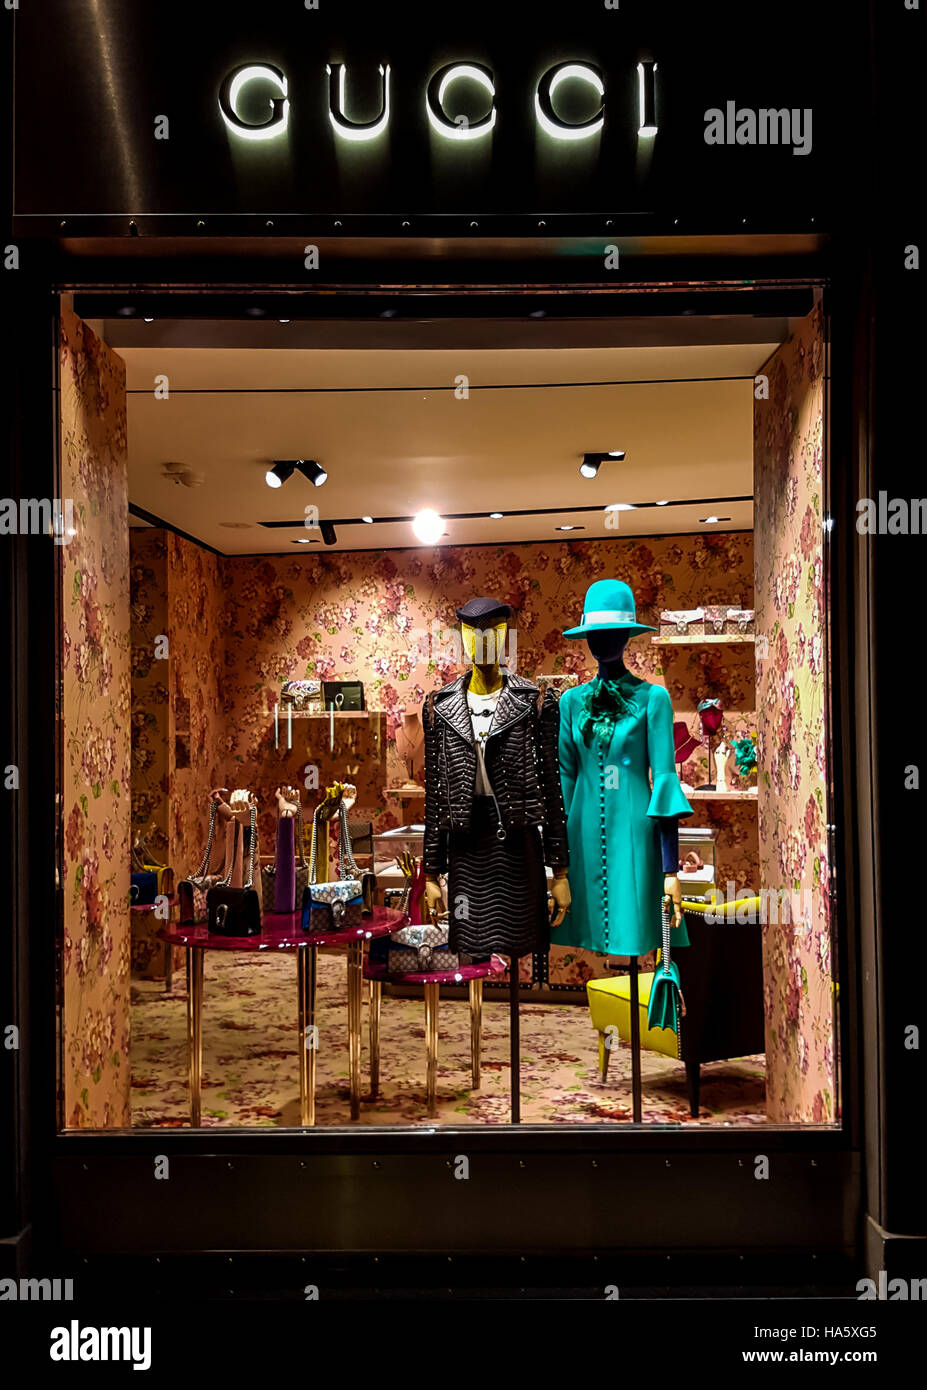 Gucci luxury bags, clothes and shoes sit displayed for sale inside a Gucci store in Florence, Italy Stock Photo